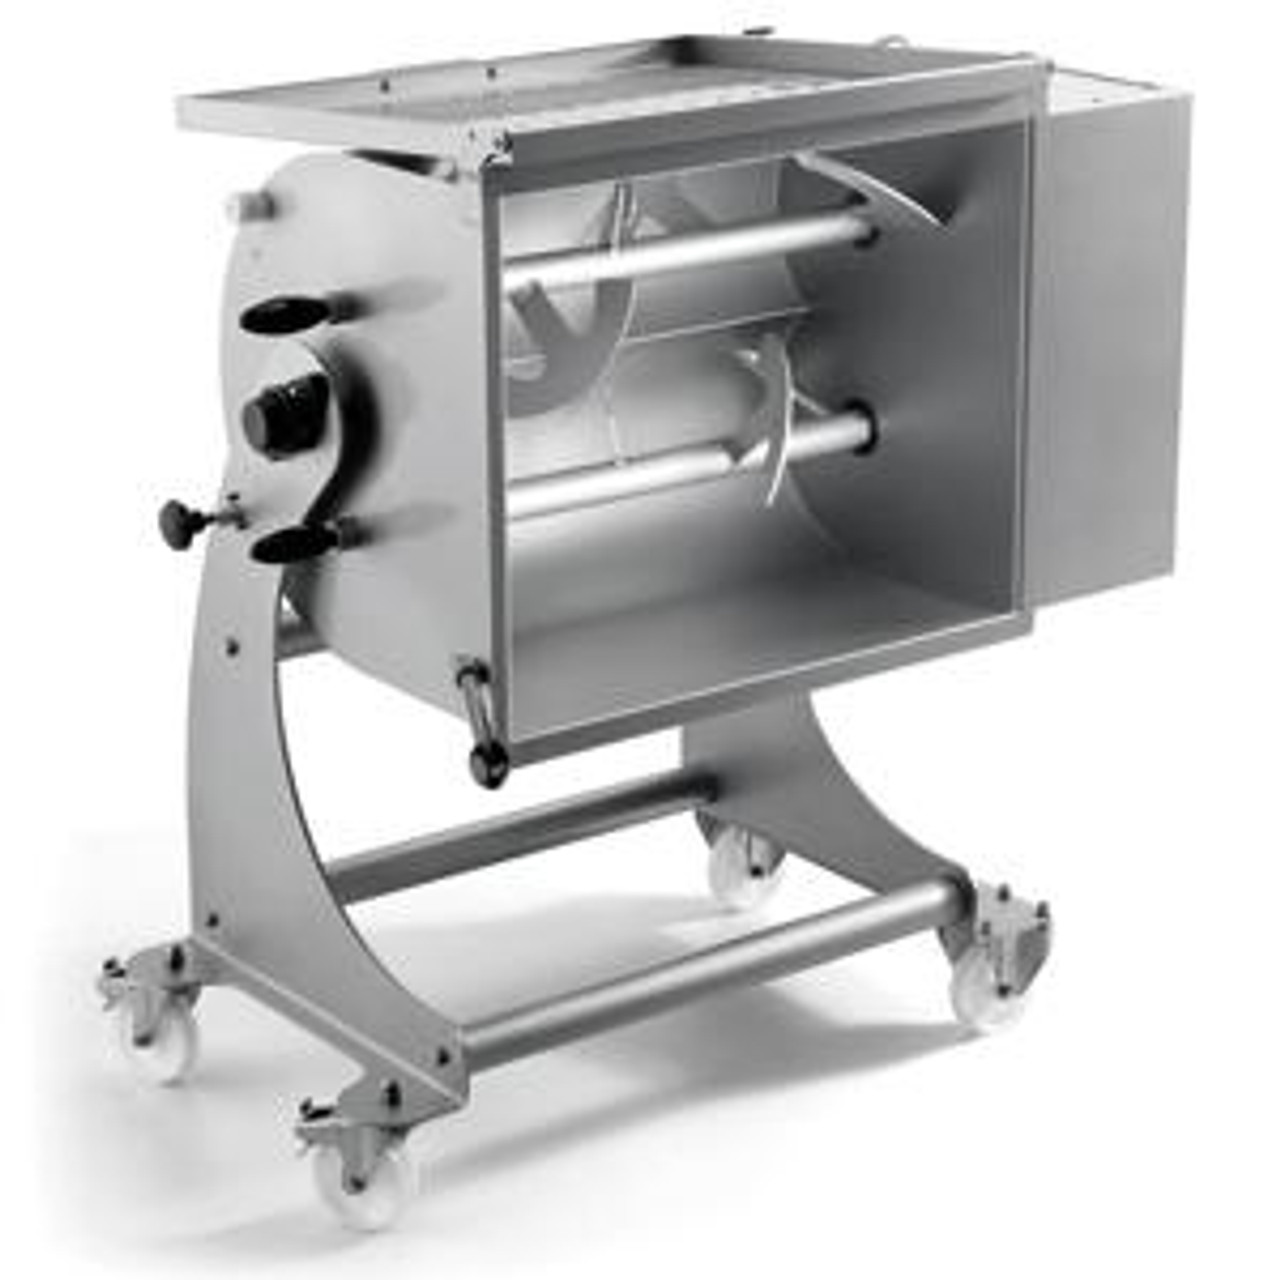 https://cdn11.bigcommerce.com/s-3n1nnt5qyw/images/stencil/1280x1280/products/12156/13724/omcan-heavy-duty-stainless-steel-meat-mixer-with-120-kg-capacity-model-37451-5__09334.1629762296.jpg?c=1?imbypass=on